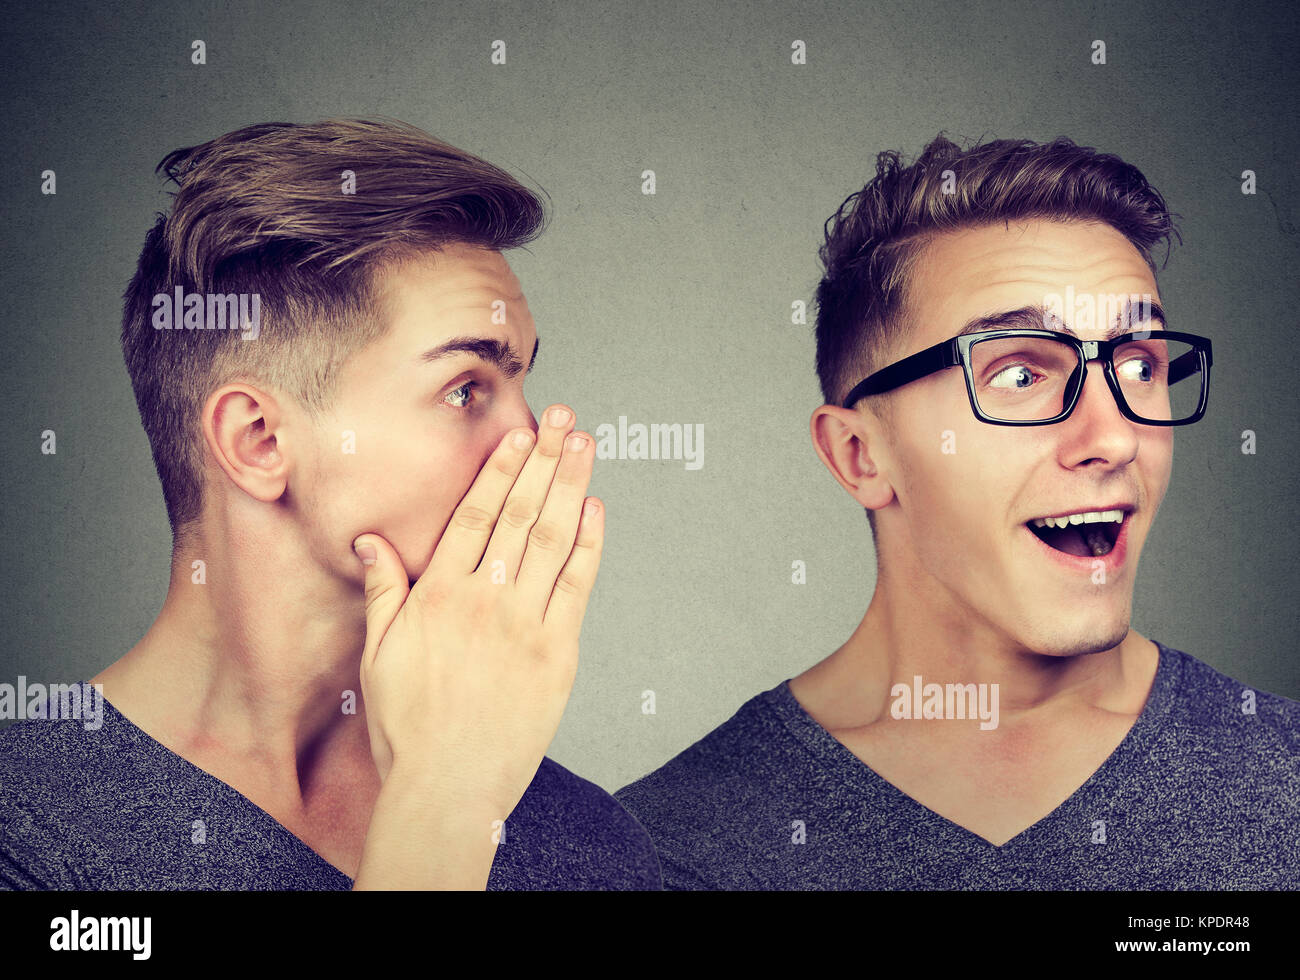 Latest rumors. Secretive man whispering in the ear to surprised himself Stock Photo